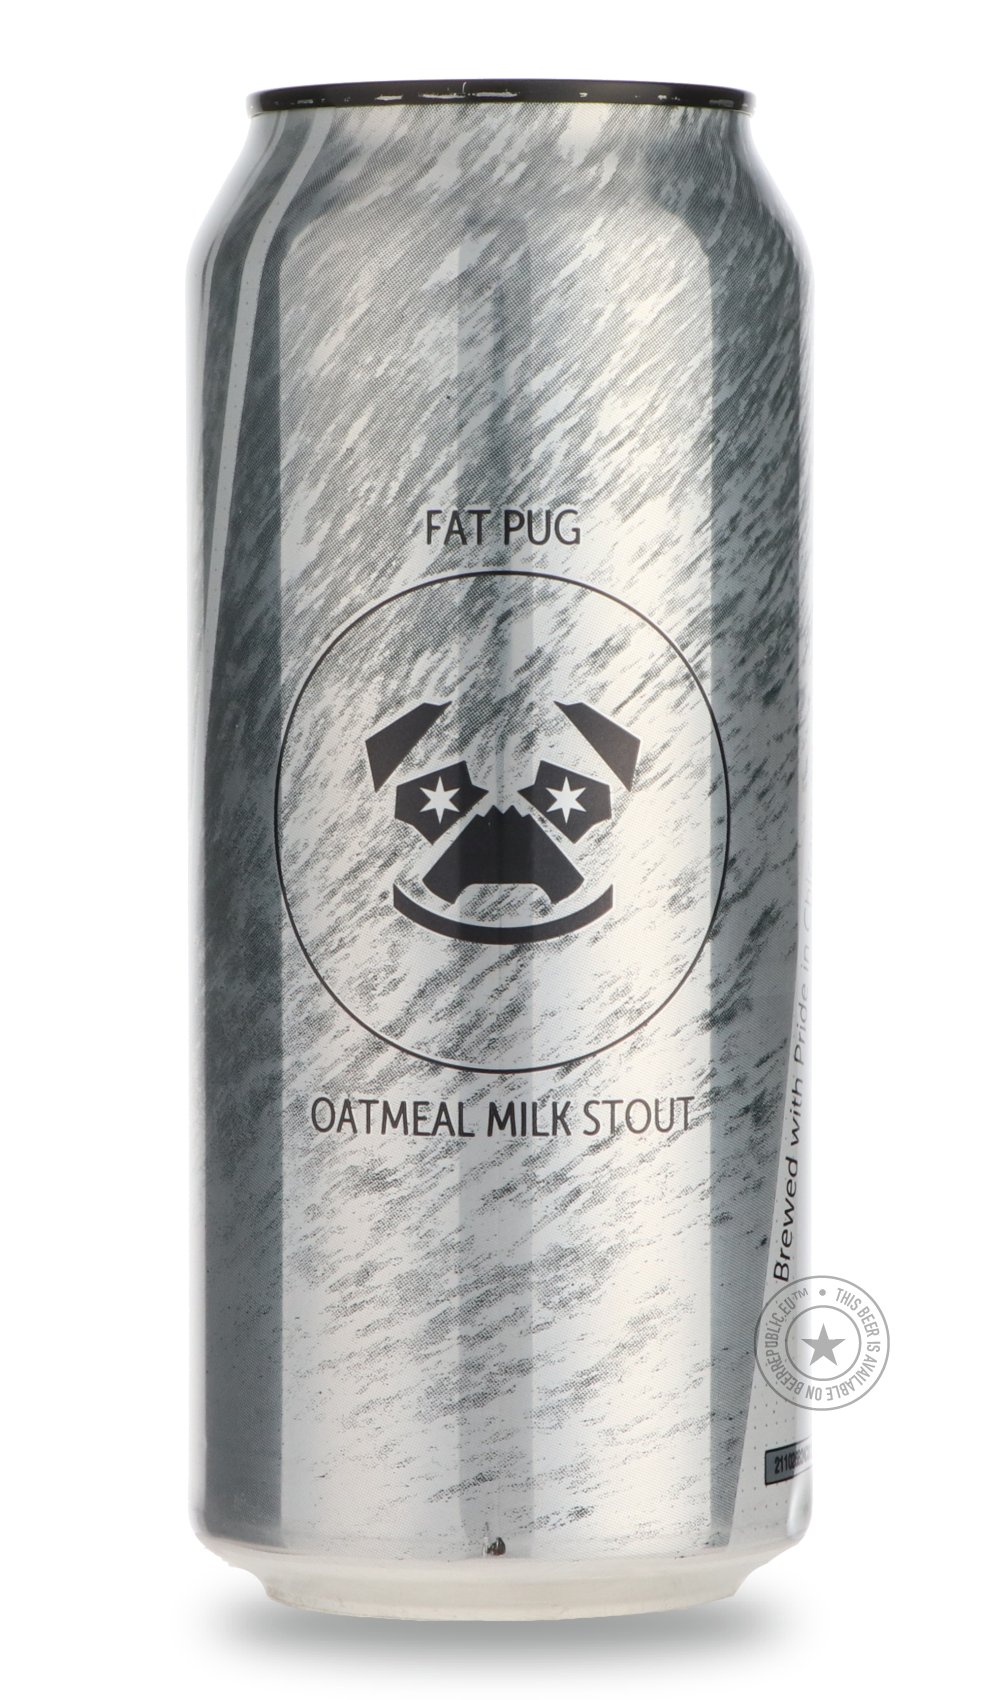 -Maplewood- Fat Pug-Stout & Porter- Only @ Beer Republic - The best online beer store for American & Canadian craft beer - Buy beer online from the USA and Canada - Bier online kopen - Amerikaans bier kopen - Craft beer store - Craft beer kopen - Amerikanisch bier kaufen - Bier online kaufen - Acheter biere online - IPA - Stout - Porter - New England IPA - Hazy IPA - Imperial Stout - Barrel Aged - Barrel Aged Imperial Stout - Brown - Dark beer - Blond - Blonde - Pilsner - Lager - Wheat - Weizen - Amber - Ba